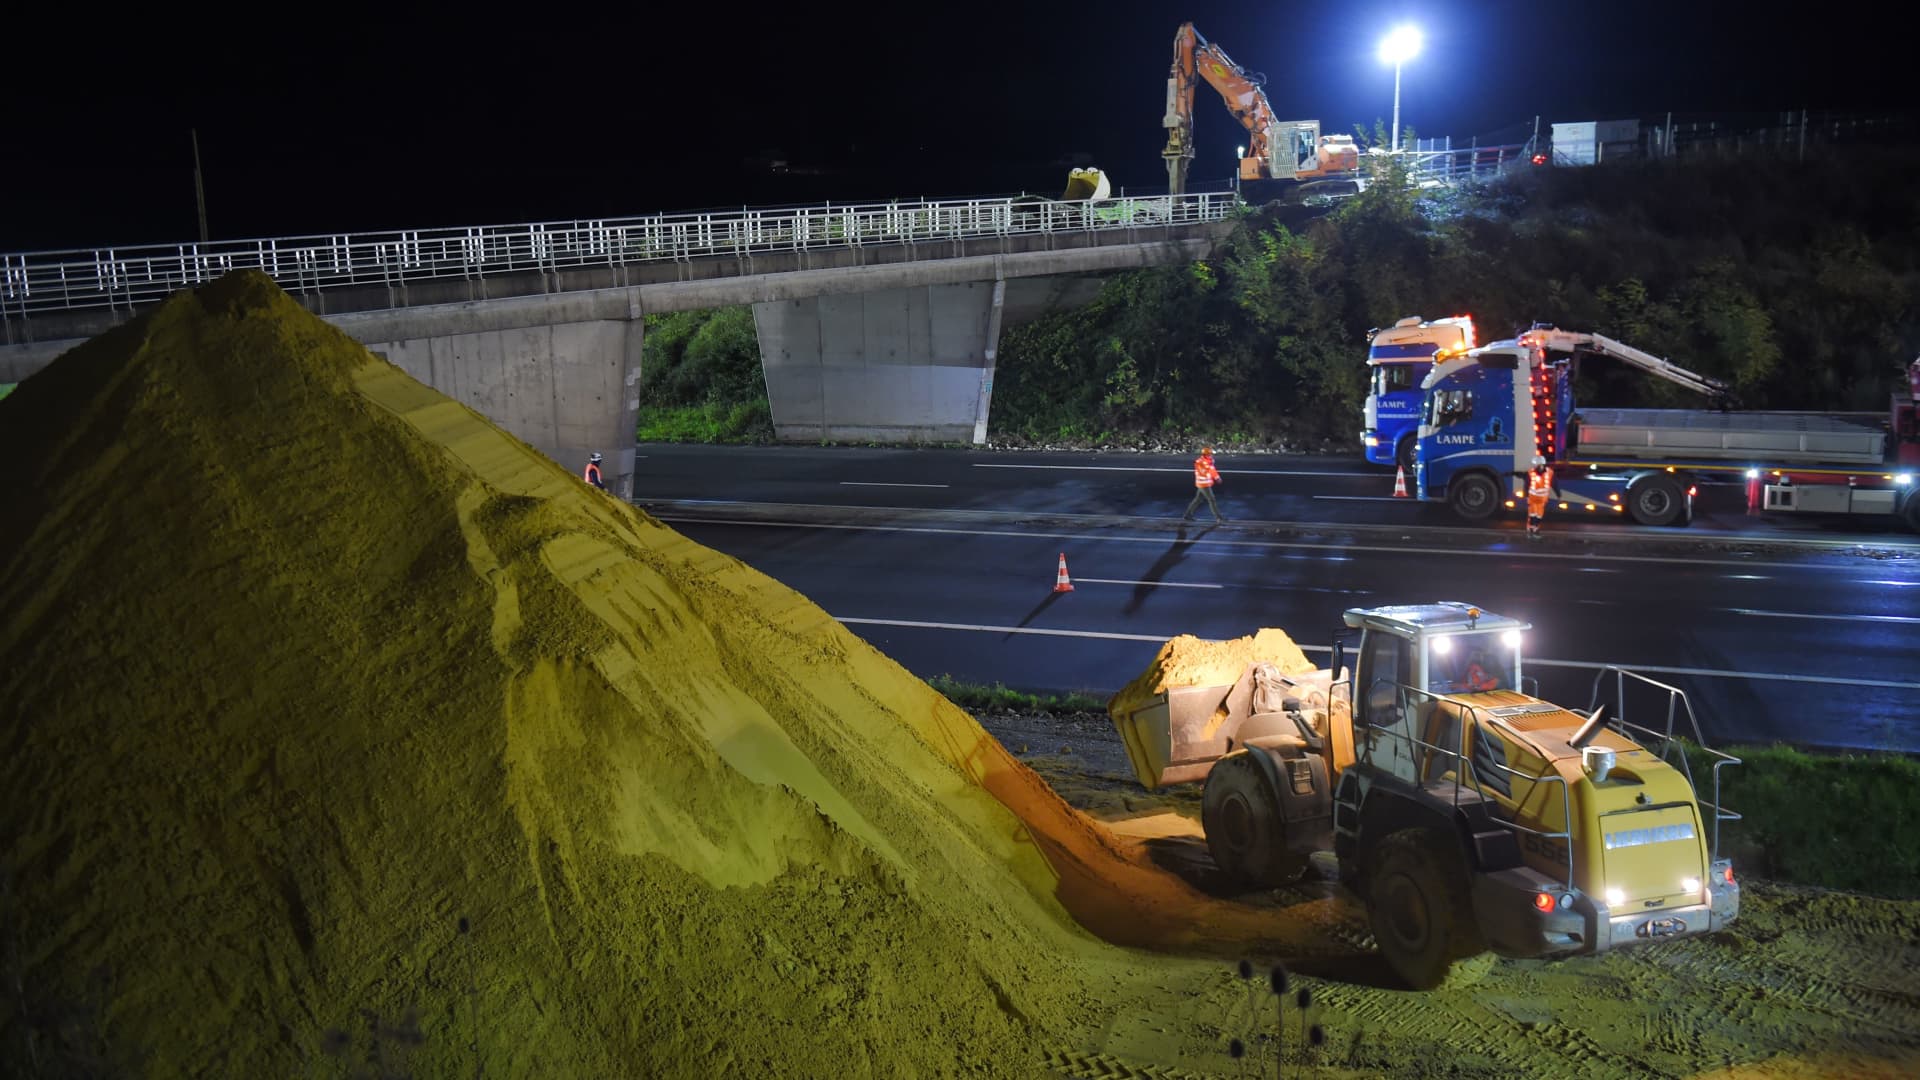 Construction cranes and vehicles cover the A10 highway between Paris and Bordeaux with sand on November 6, 2019 near Monts, central France.